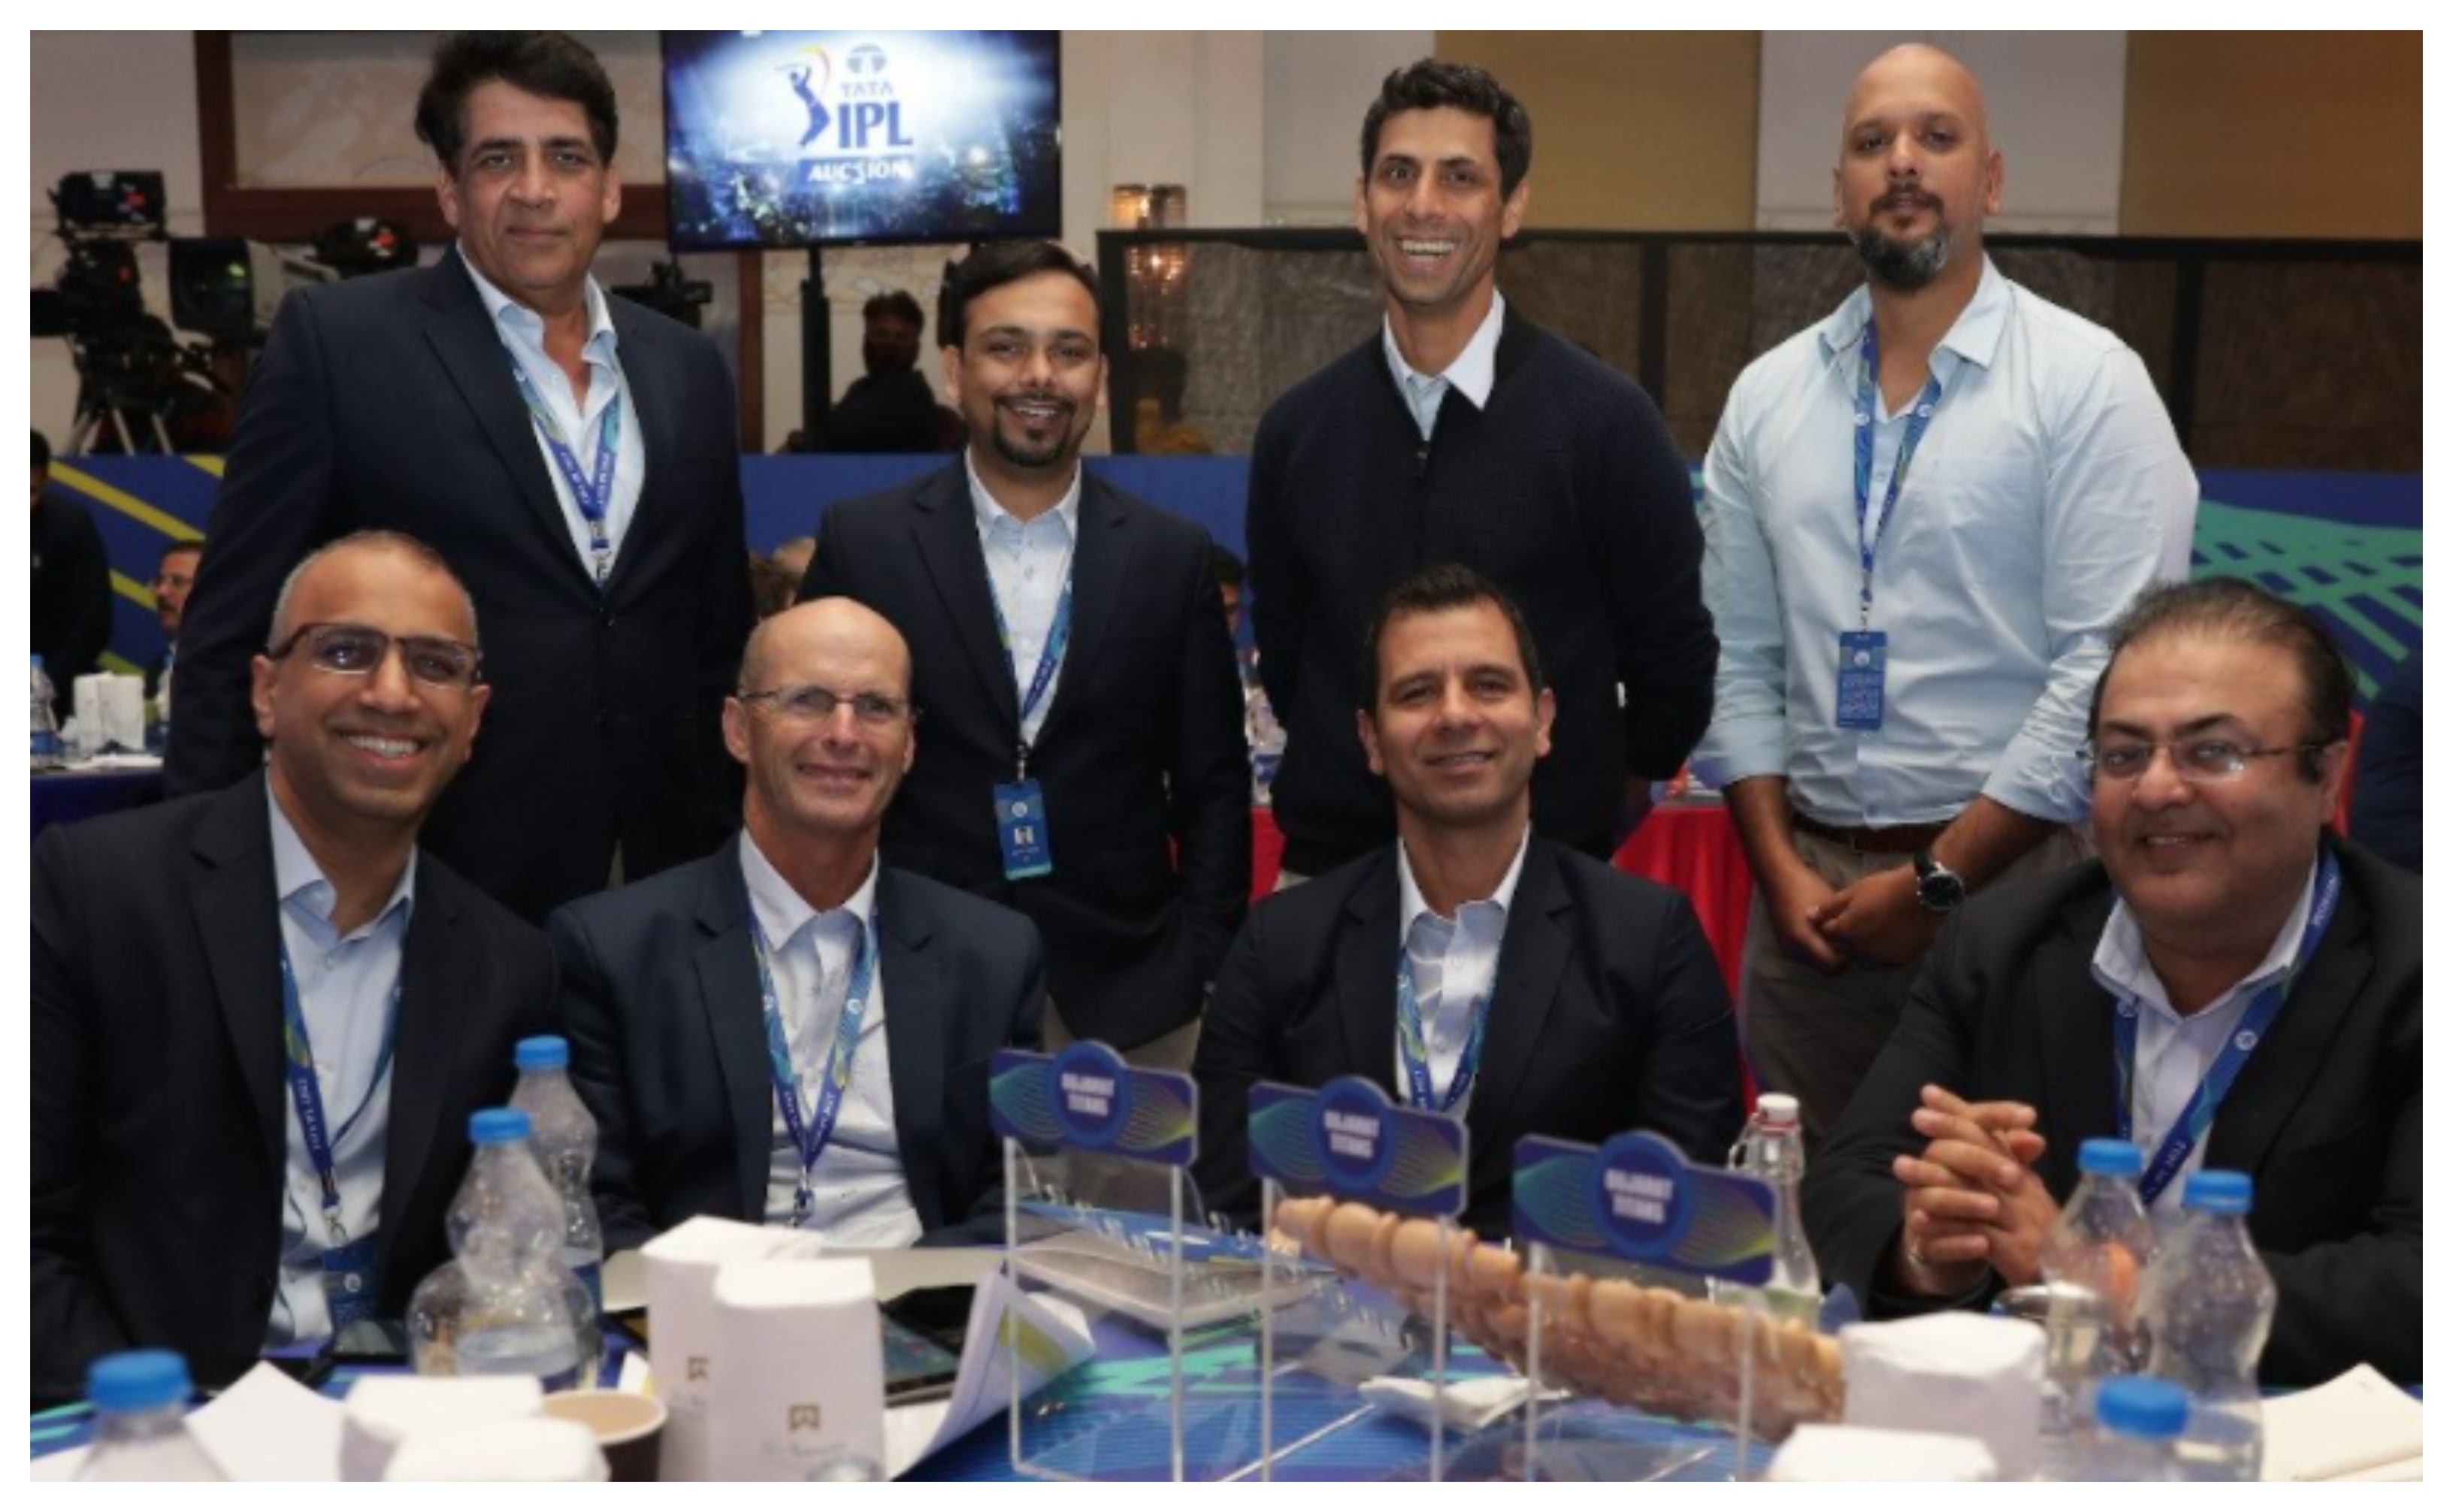 Gujarat Titans owners and coaching staff at the IPL 2022 mega auction | @gujarat_titans/Twitter